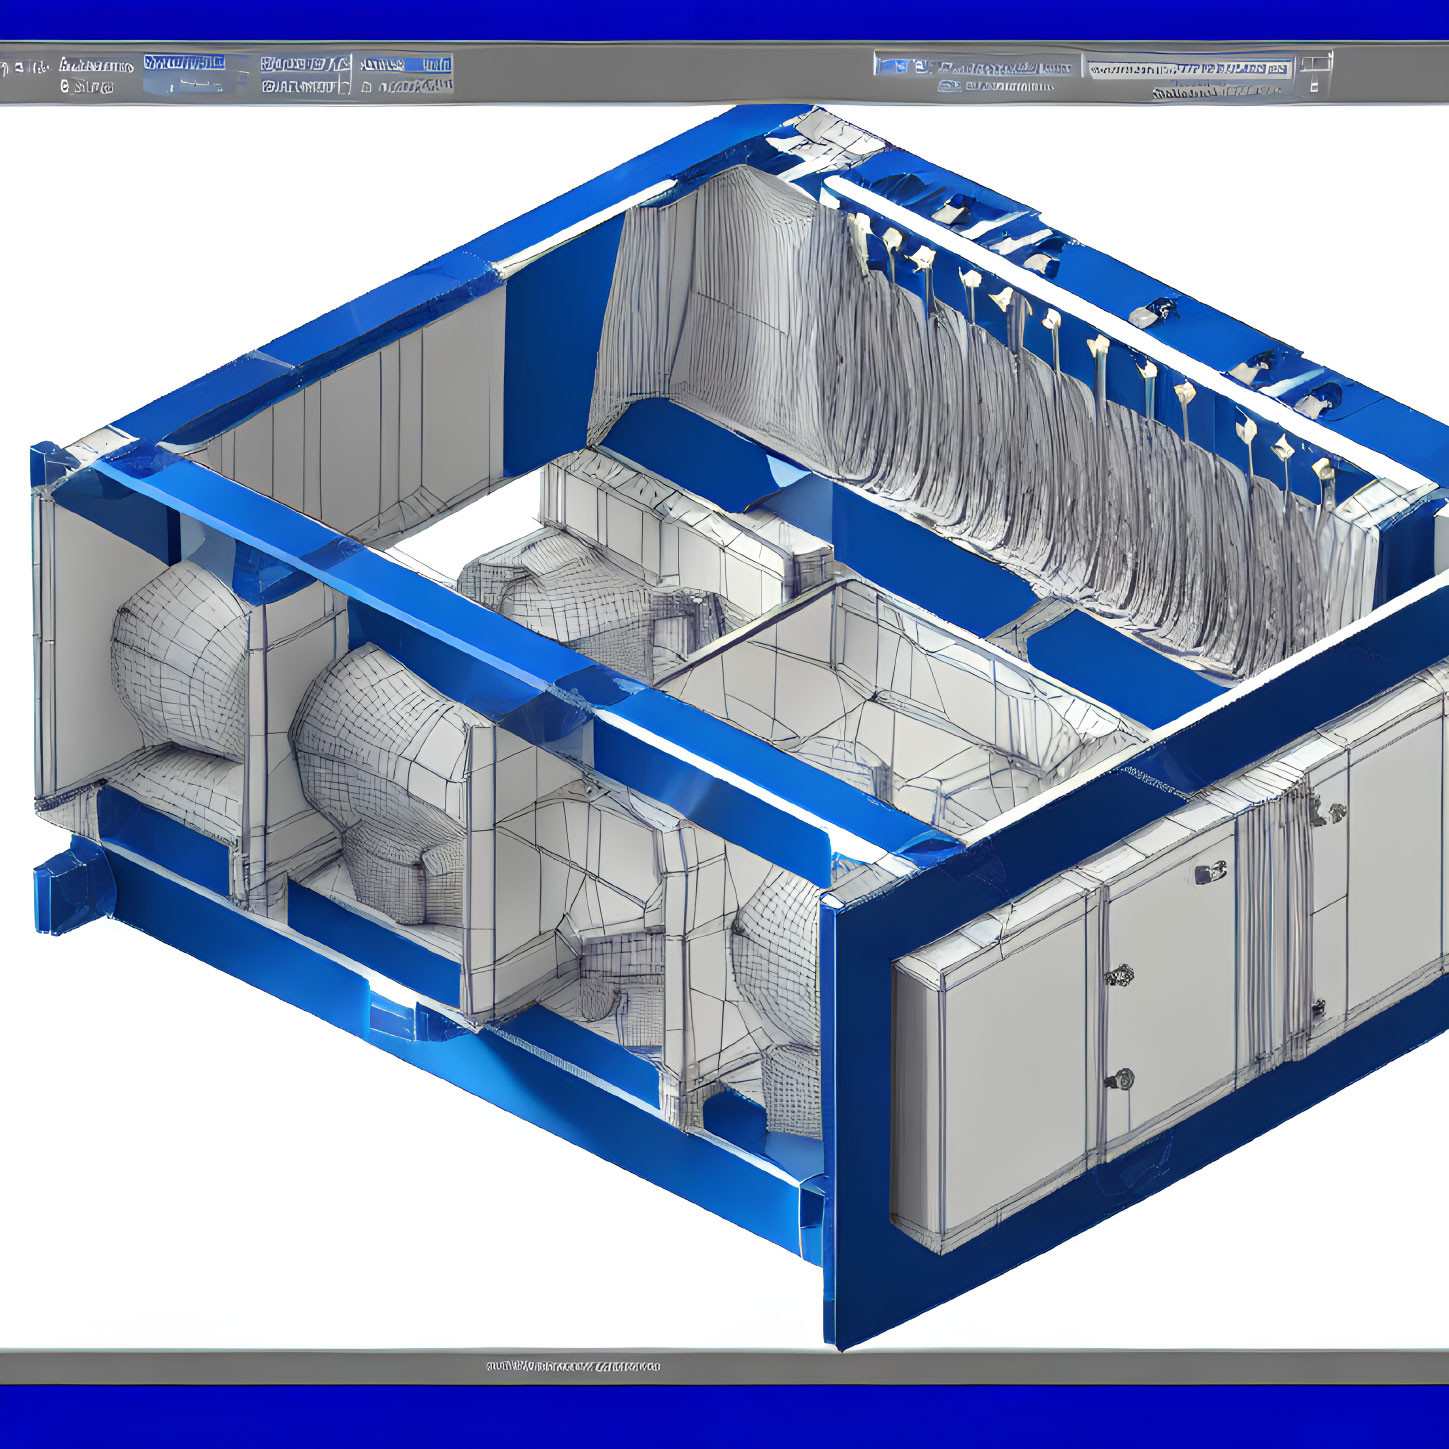 Detailed 3D CAD model of multi-compartment industrial machine with tanks, piping, and structural supports